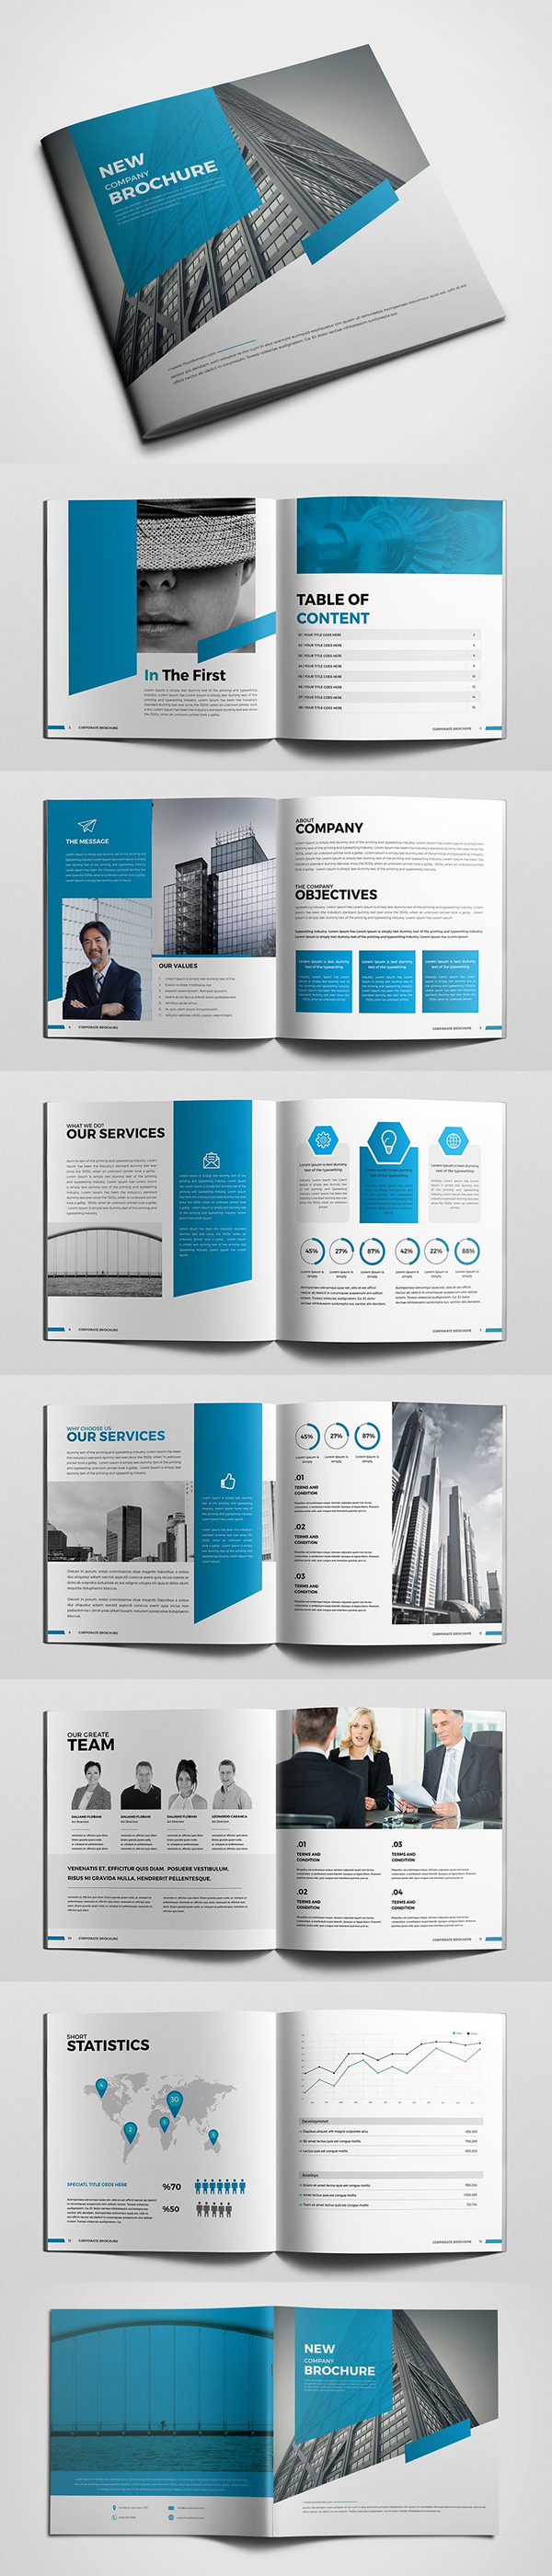 Square Business Brochure Template